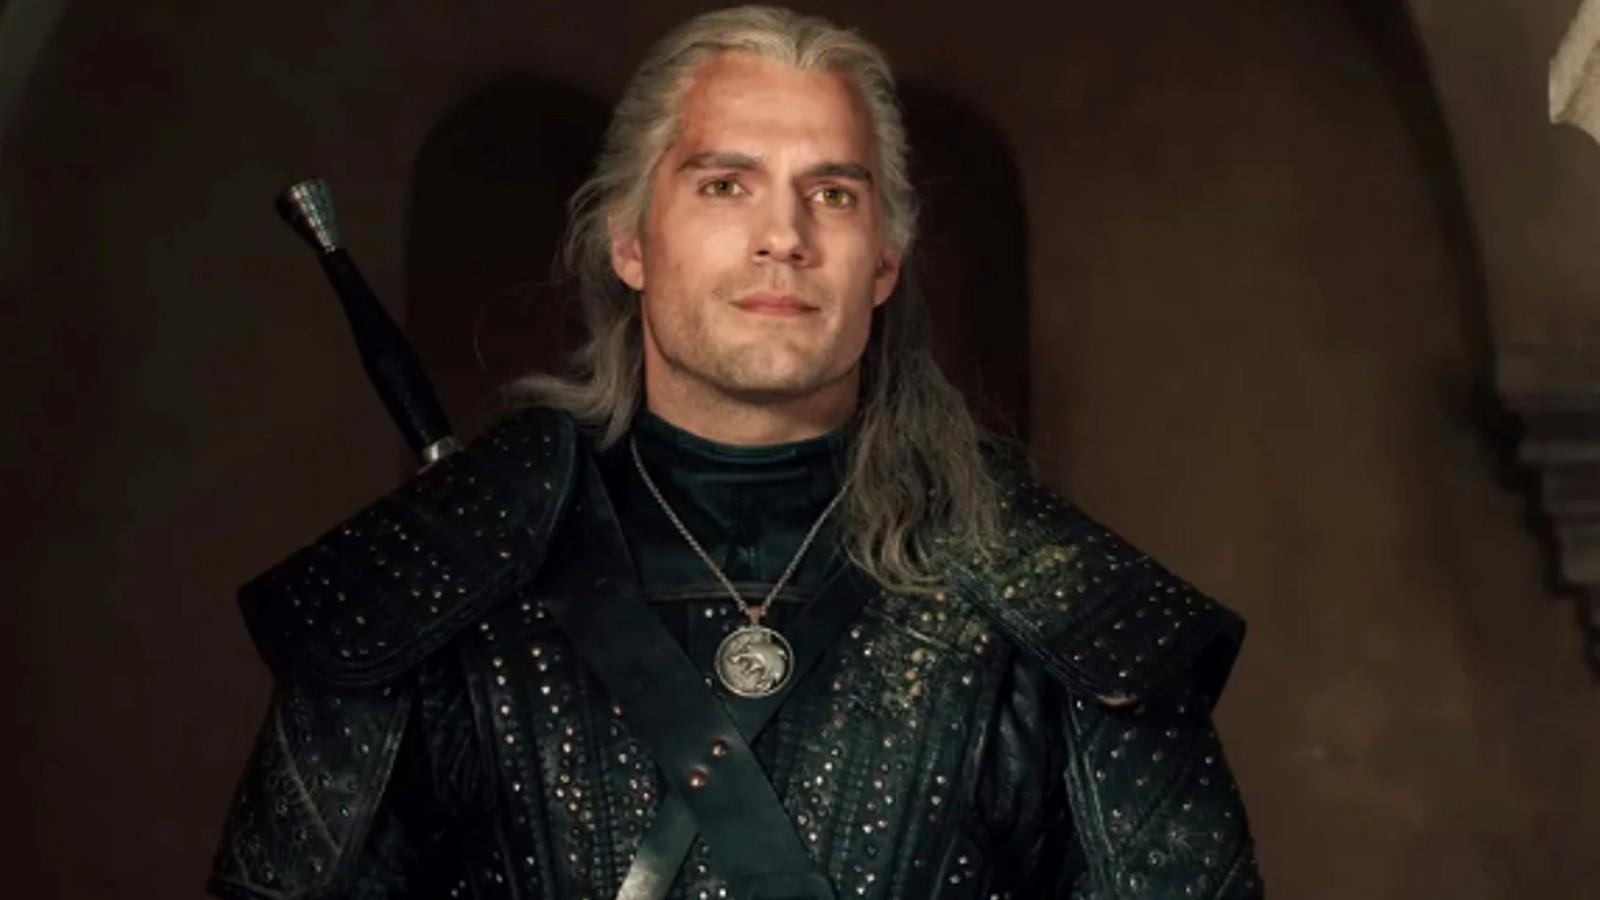 Who's Who in Netflix's The Witcher Cast, from Renfri to Stregobor - IGN